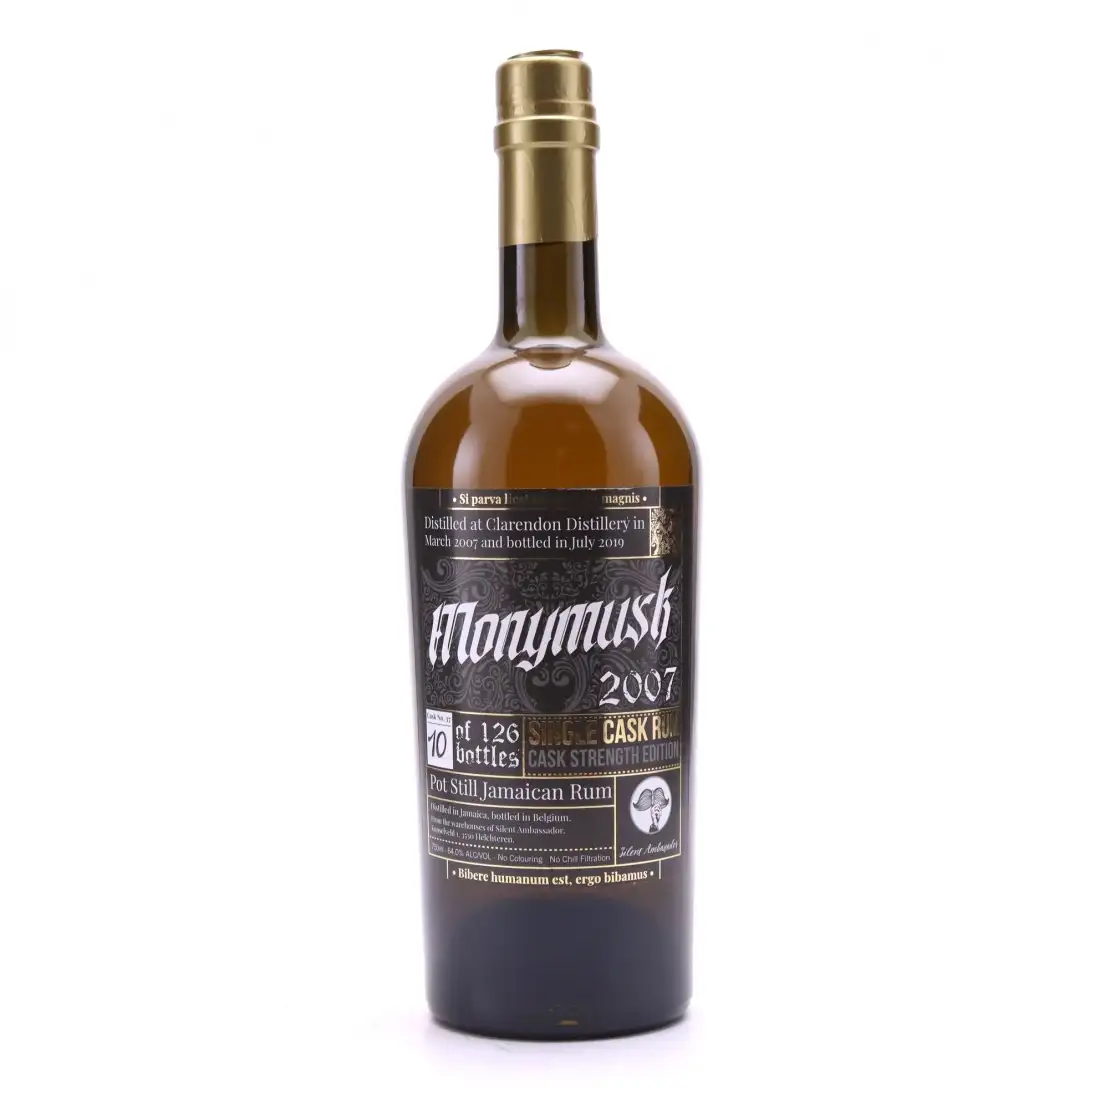 Image of the front of the bottle of the rum Monymusk 2007